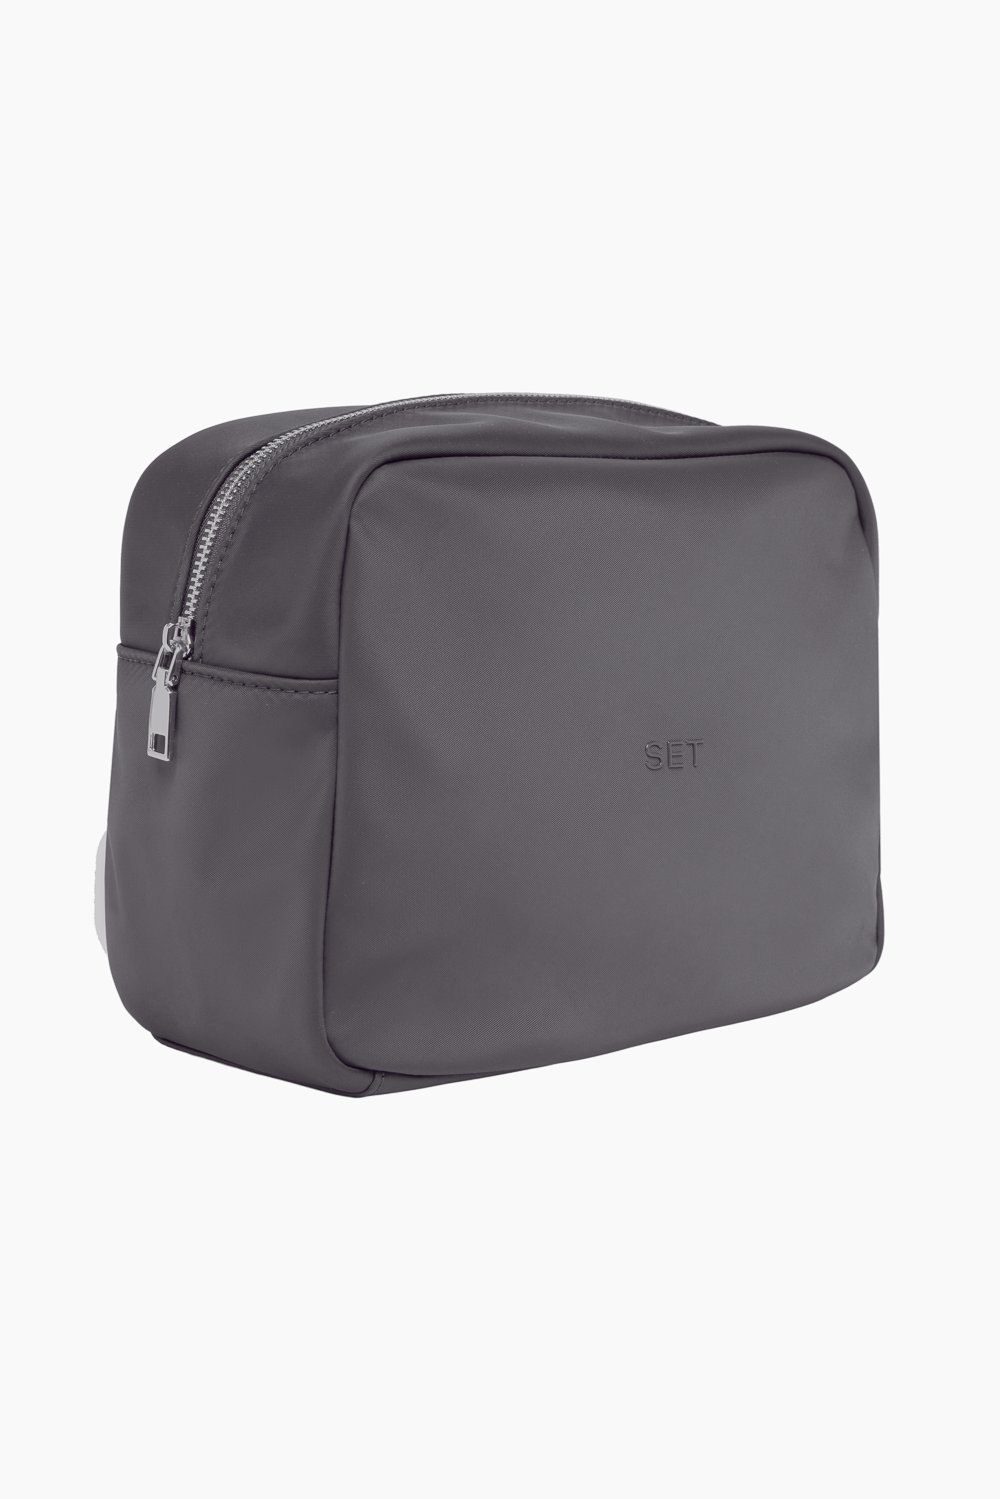 SET™ EVERYTHING BAG IN GRAPHITE